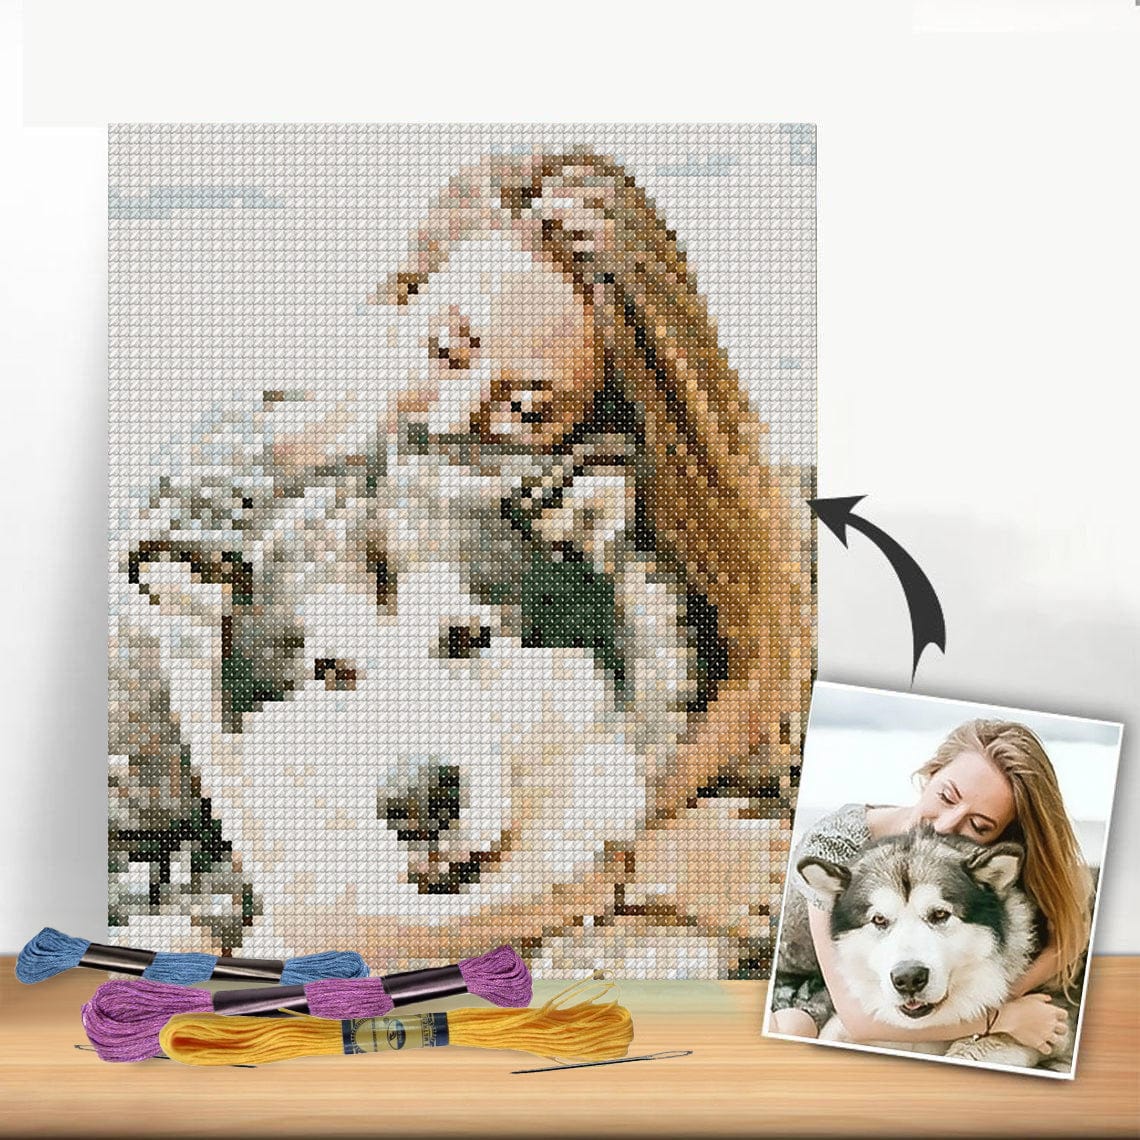 Cross Stitch | Leshan - Brown Short Coated Dog Sitting On Brown Wooden Floor - Cross Stitched